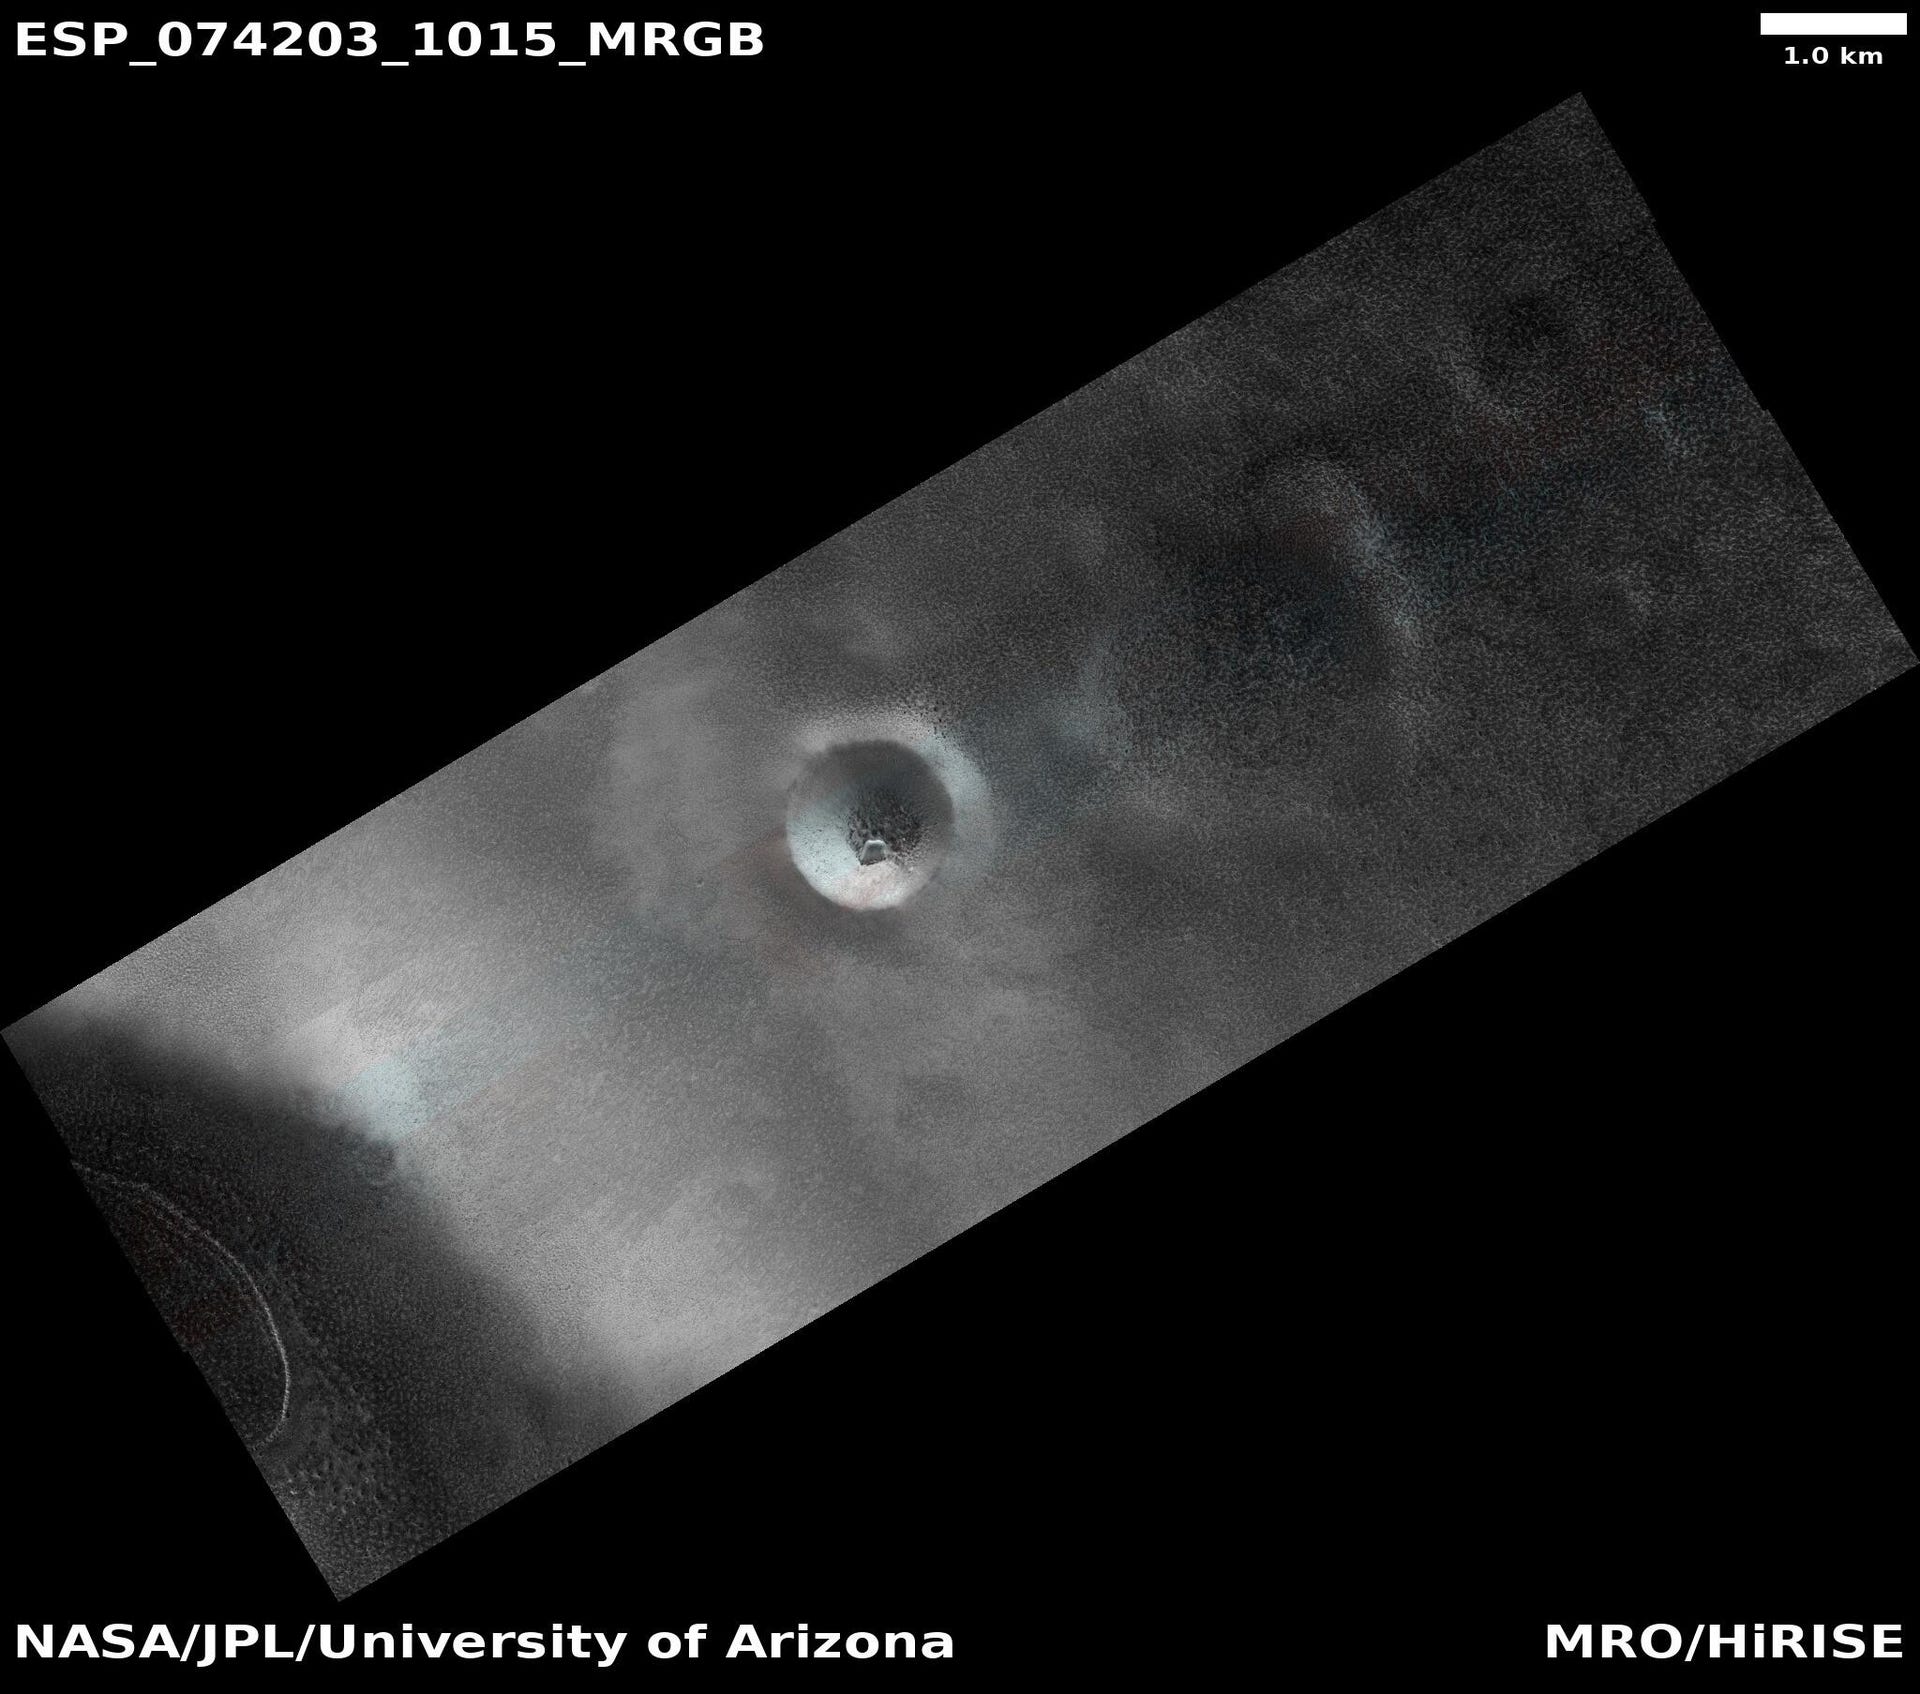 MRO view of Mars shows a diagonal strip of surface with a prominent crater in the center.